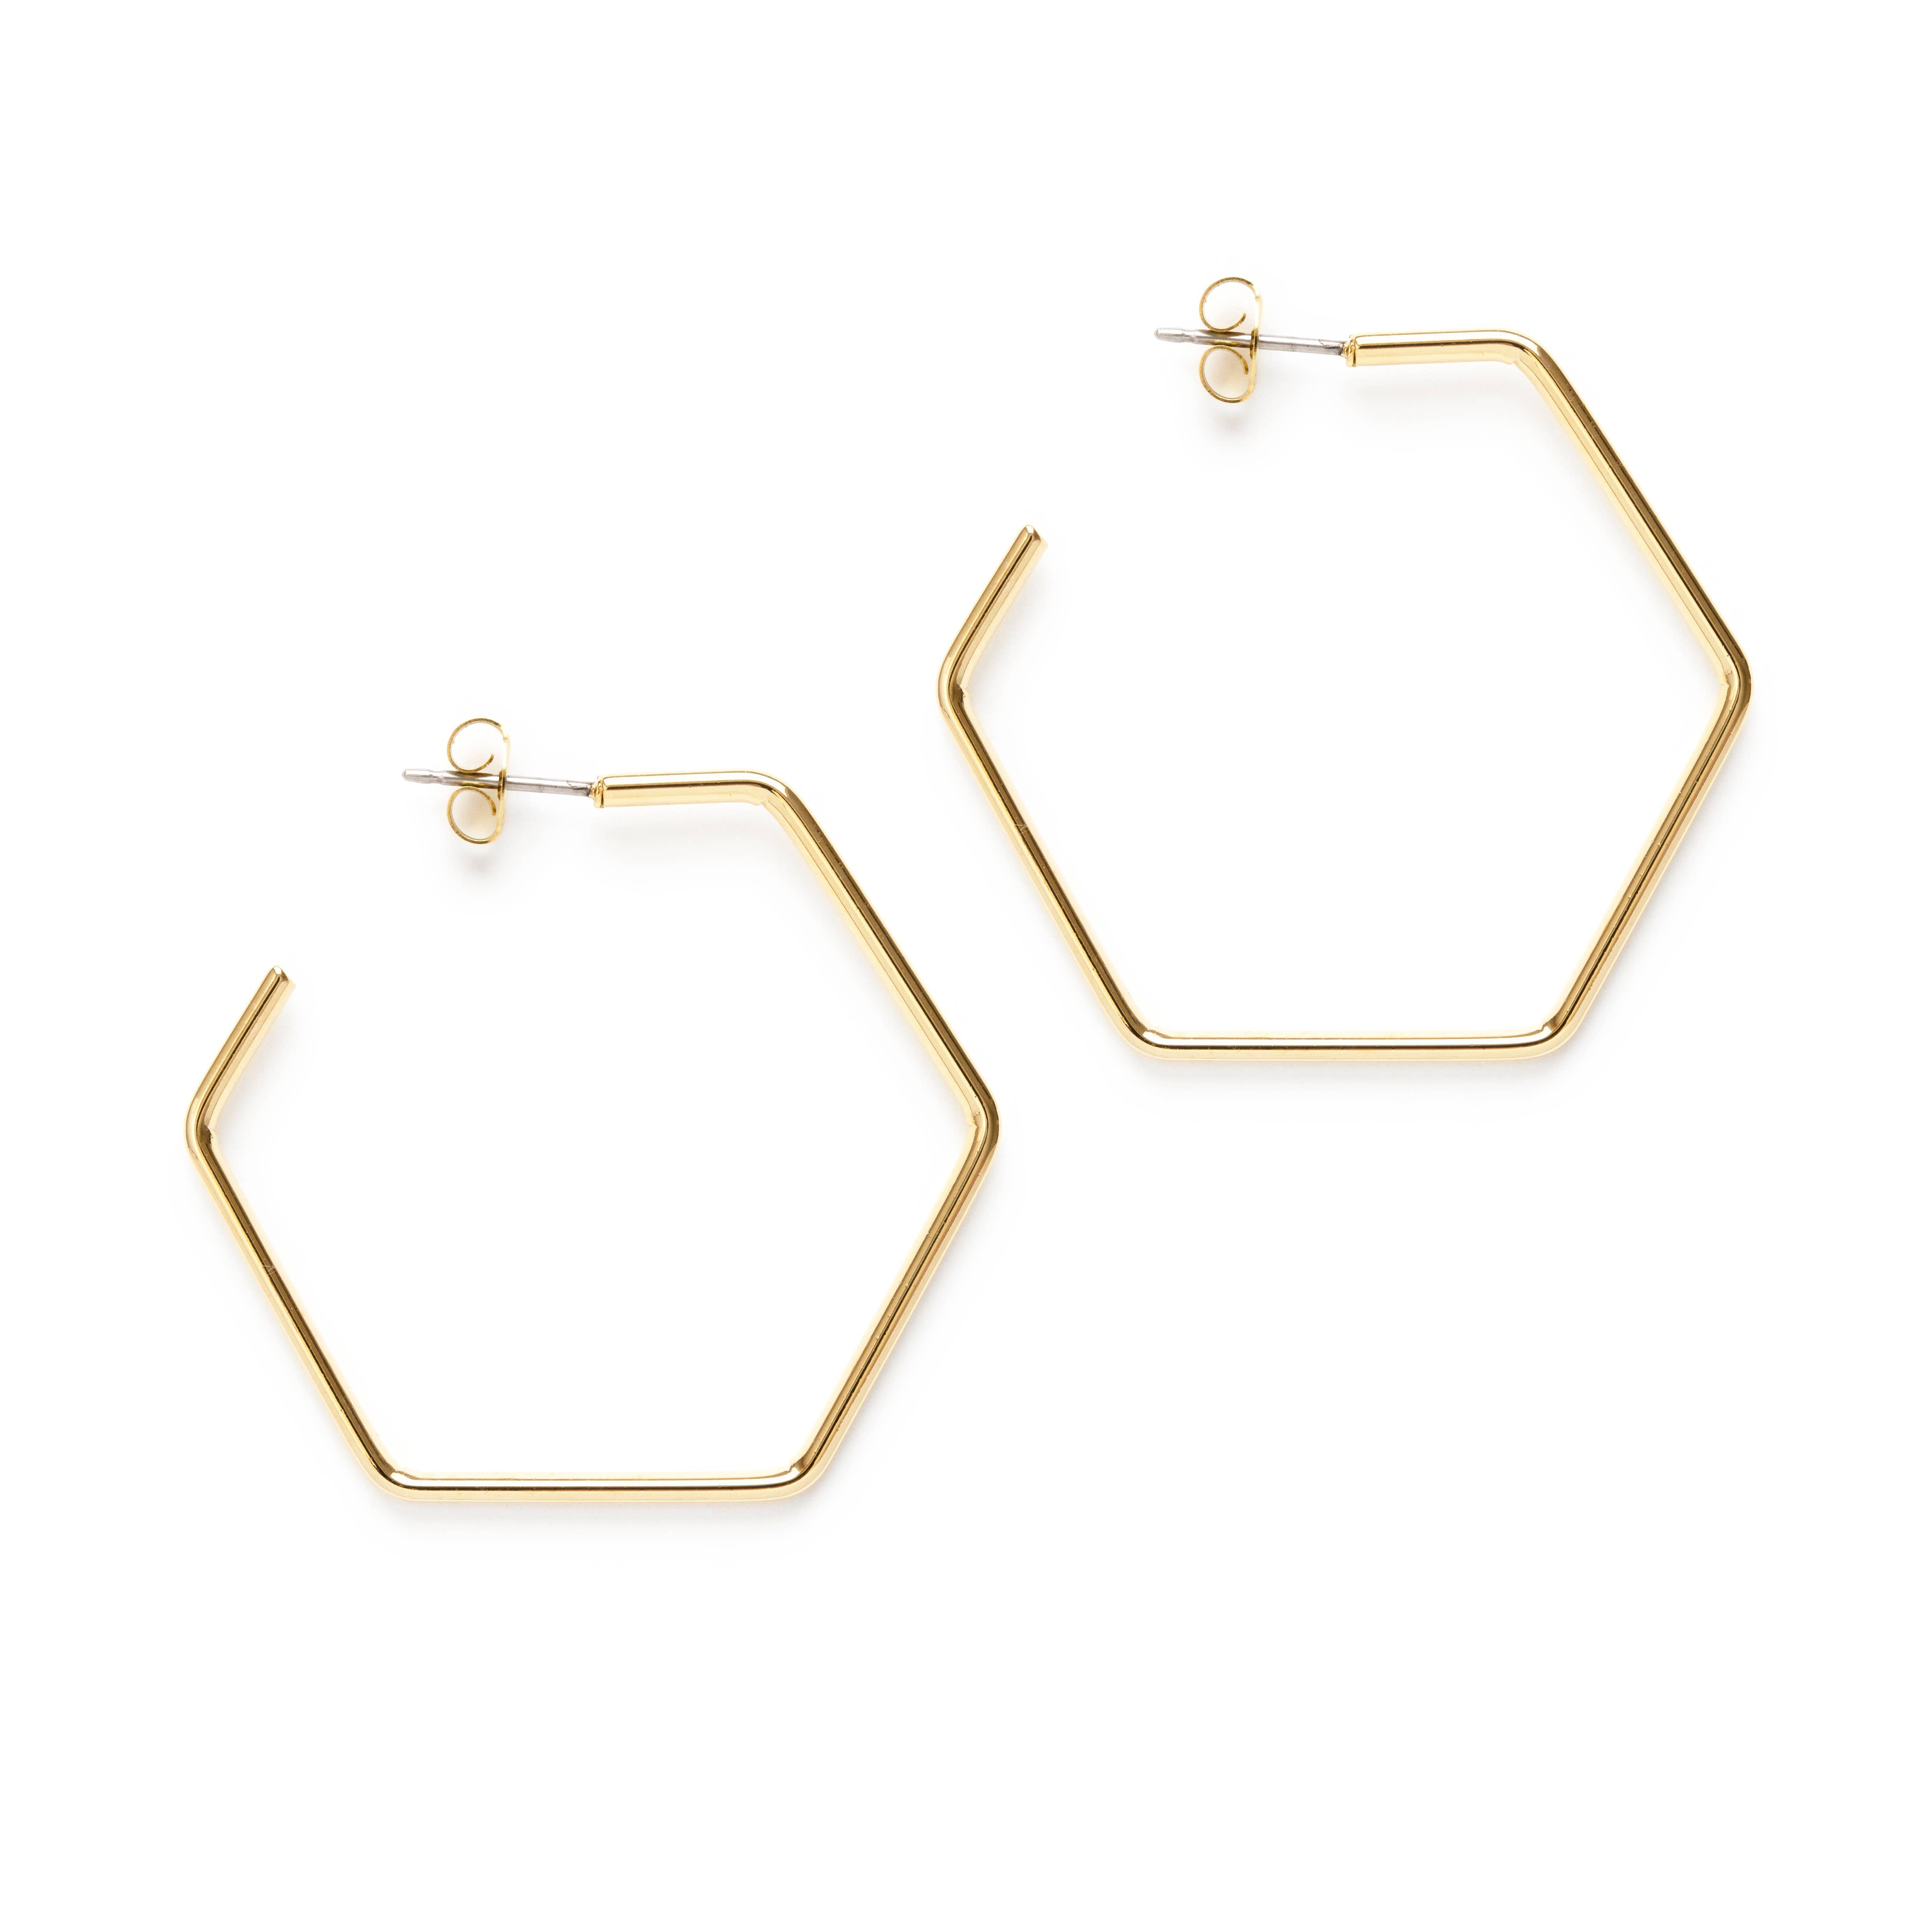 Hexagon Hoop Earrings - Out of the Blue